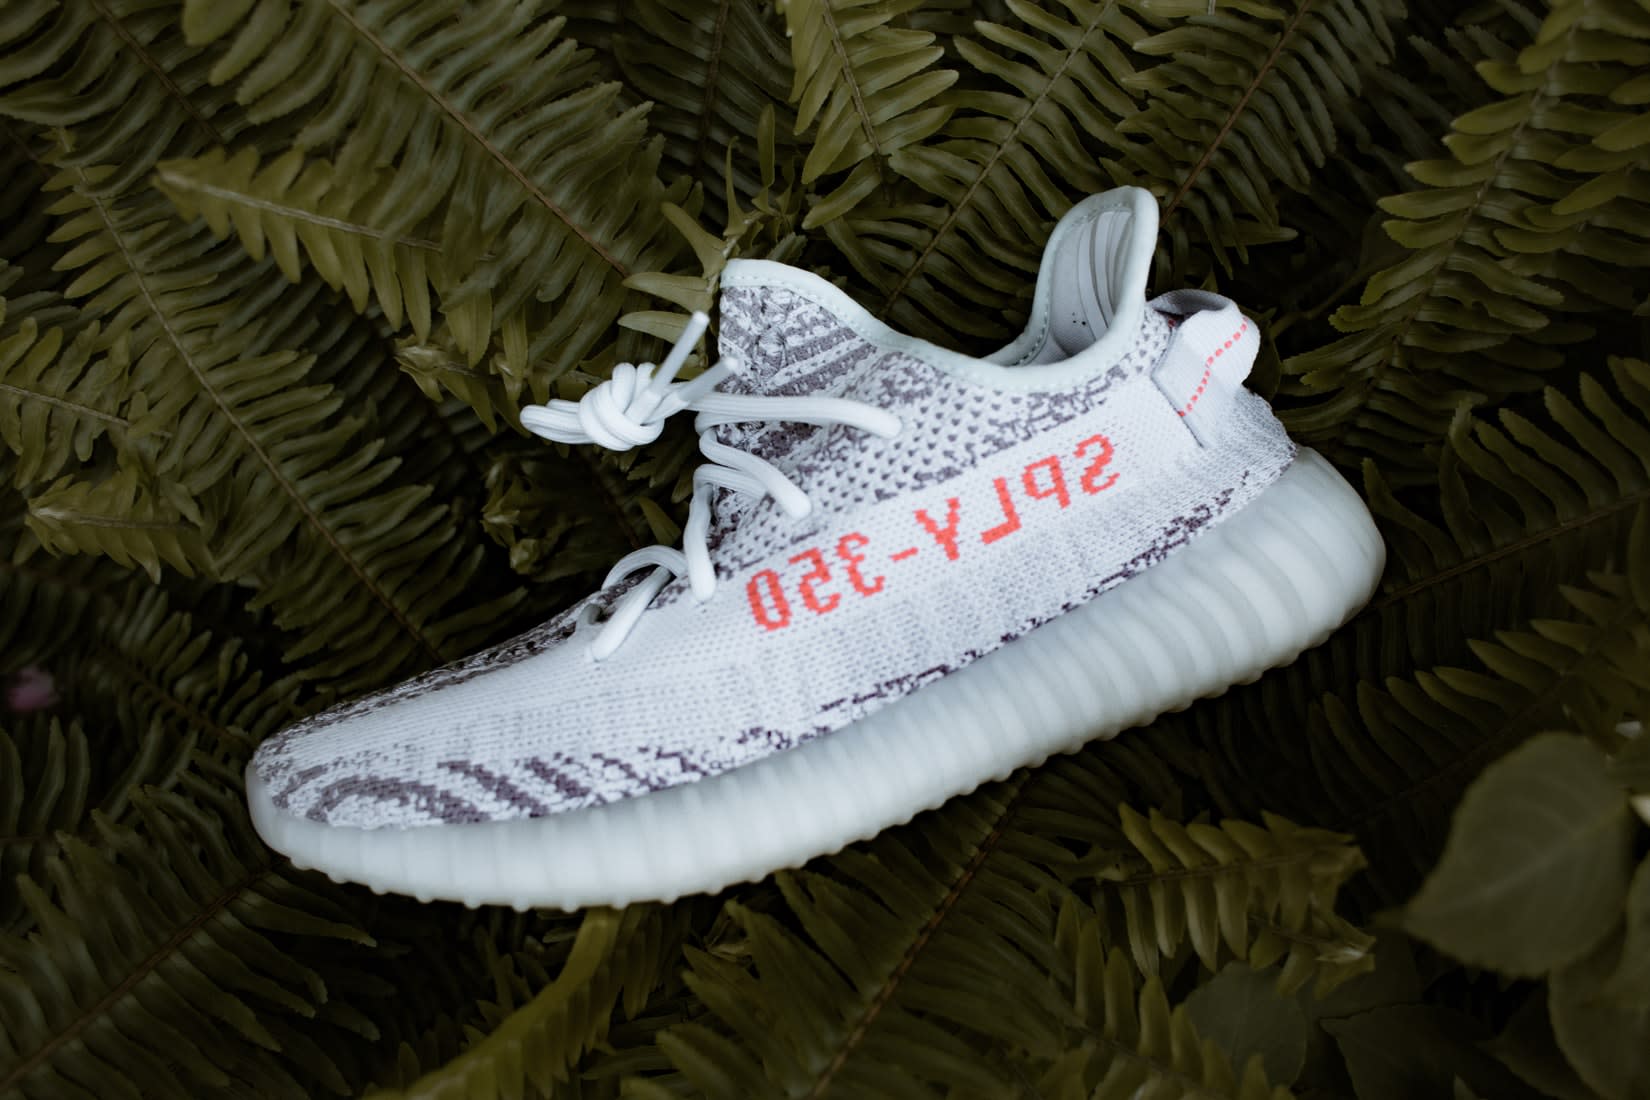 Cover Image for Yeezy Size Guide - How do they fit?